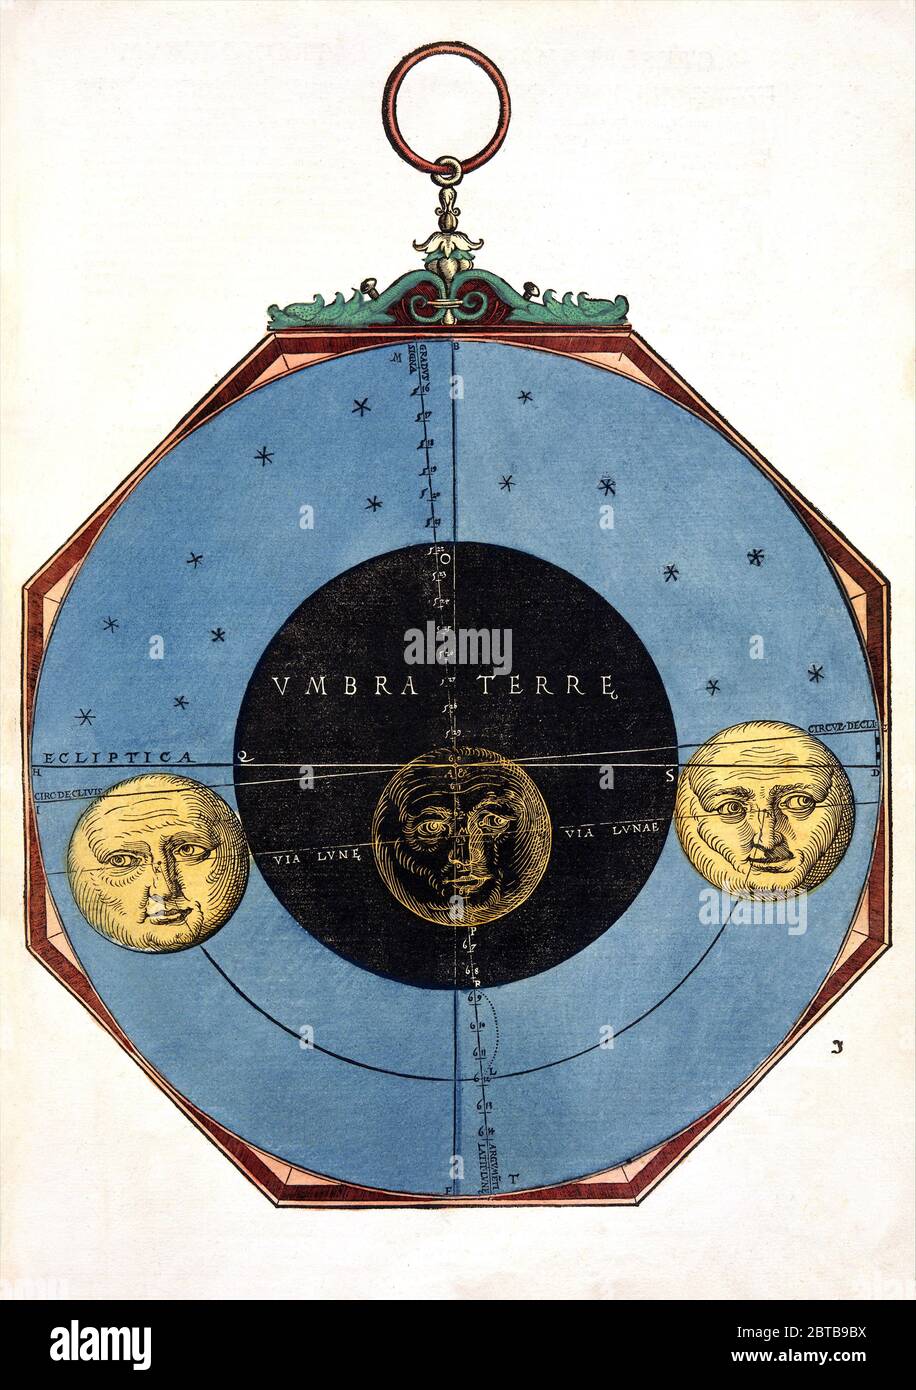 1540, GERMANY : The german cartographer , astronomer and mathematician  PETER APIAN aka PETRUS APIANUS aka PIETRO APIANO ( 1495 - 1552 ). Illustration from the book by Peter Apian ASTRONOMICUM CAESAREUM, printed in ( 1540 ), engraved by Michael Ostendorfer . - TOLOMEUS - TOLOMEO - AMERICO VESPUCCI - Amerigo - Peter Bennewitz or Peter Bienewitz - CARTOGRAFO - CARTOGRAFIA - CARTOGRAPHY - GEOGRAFIA - GEOGRAPHY - HISTORY - foto storiche  - COSMOGRAFIA - COSMOGONIA - ASTRONOMIA - ASTRONOMY - ASTRONOMER - ASTRONOMO -  illustrazione - illustration - engraving - incisione  - cartografo - cartografia - Stock Photo